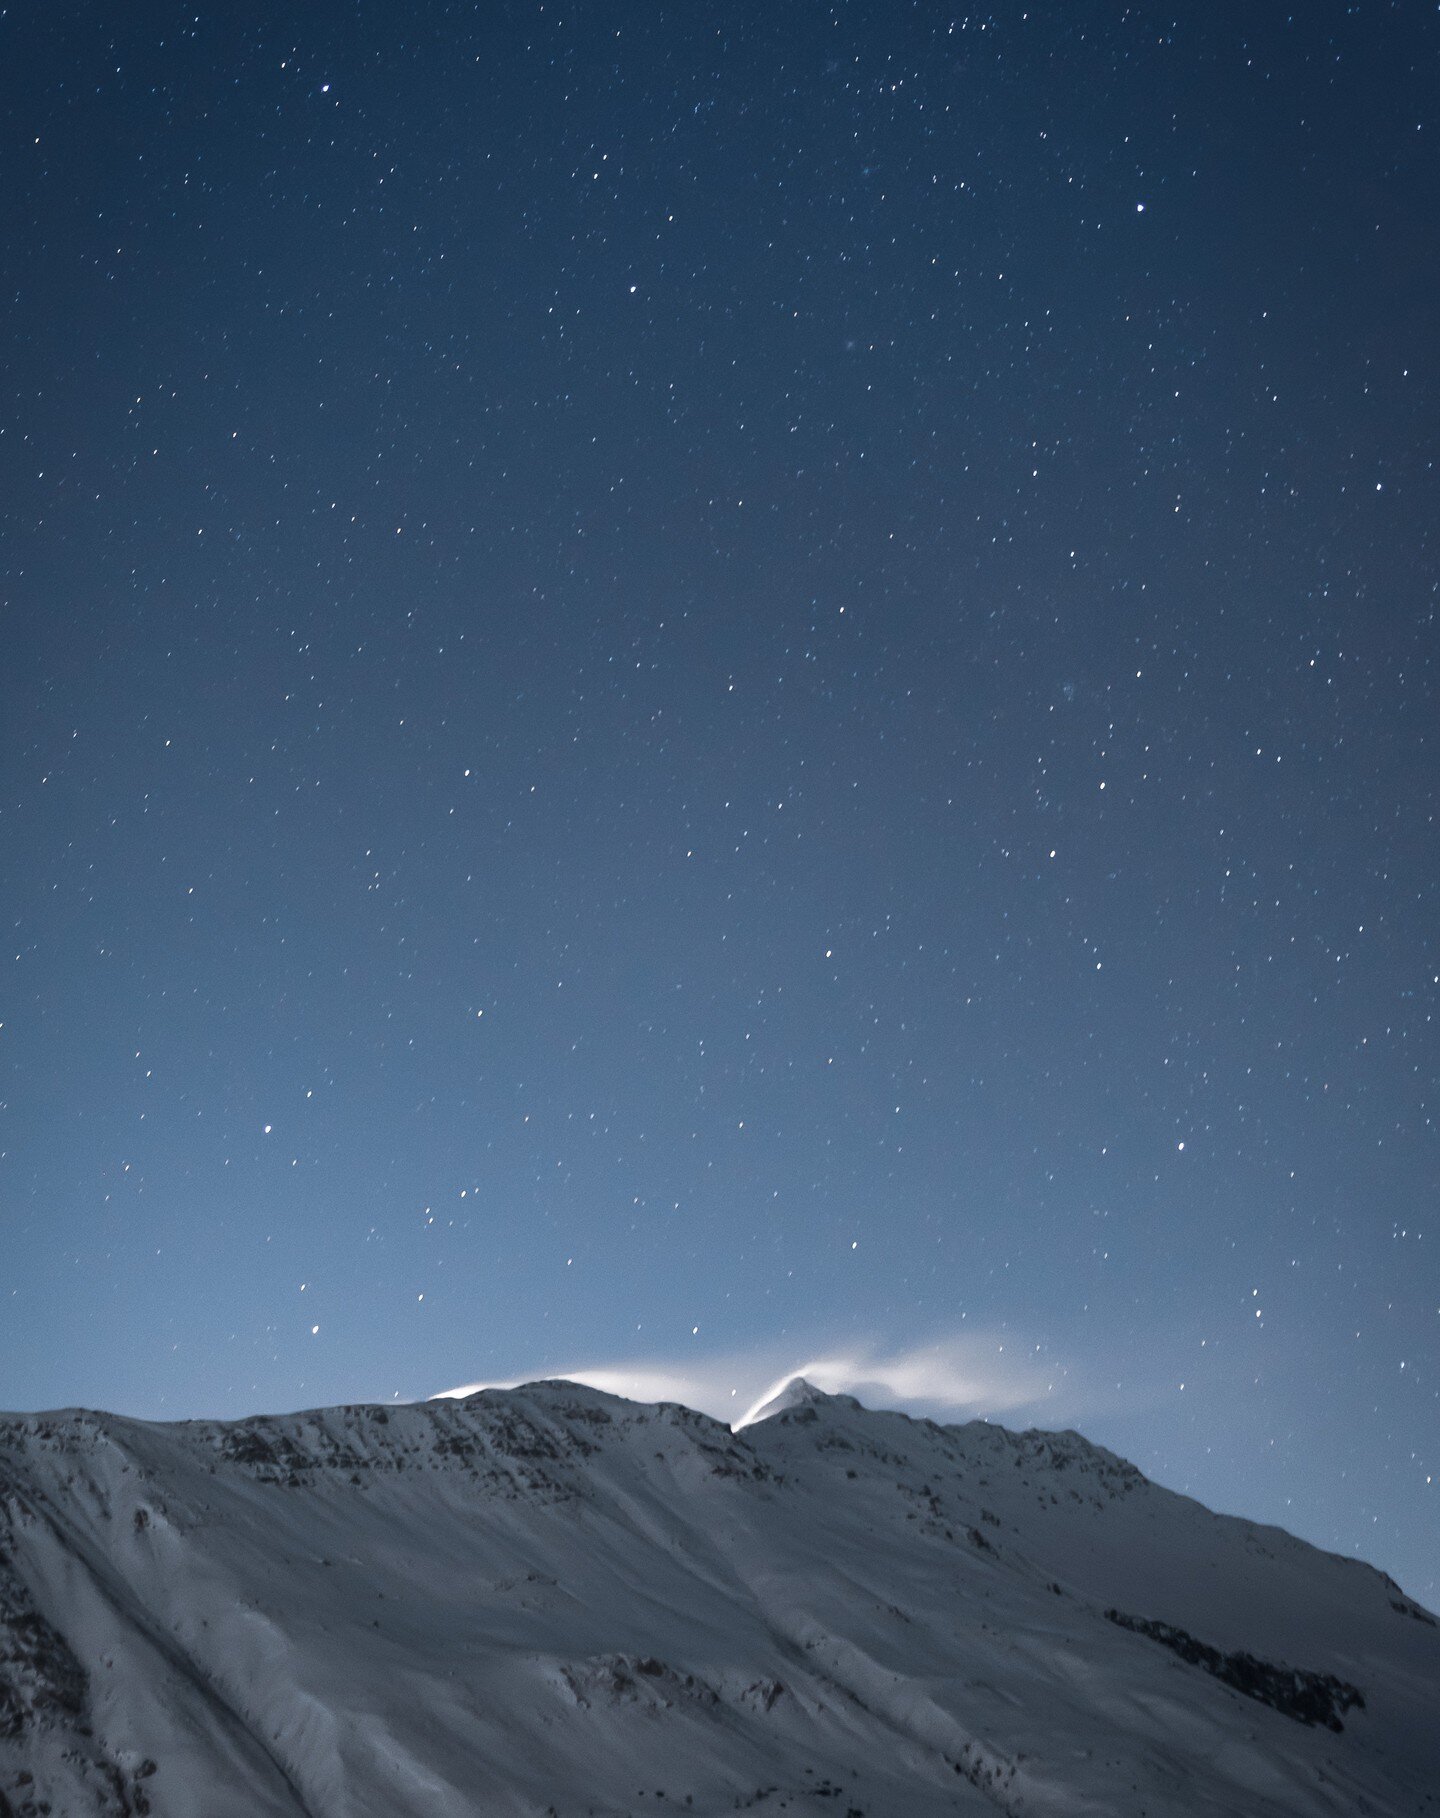 December &lsquo;22, 09:45 pm, waning moon just over the alps, snow being blown away by the wind, -35 degrees felt -40, 15 seconds with the shutter open and this was my view.

One of those moments where the colder I felt and the more my nervous system